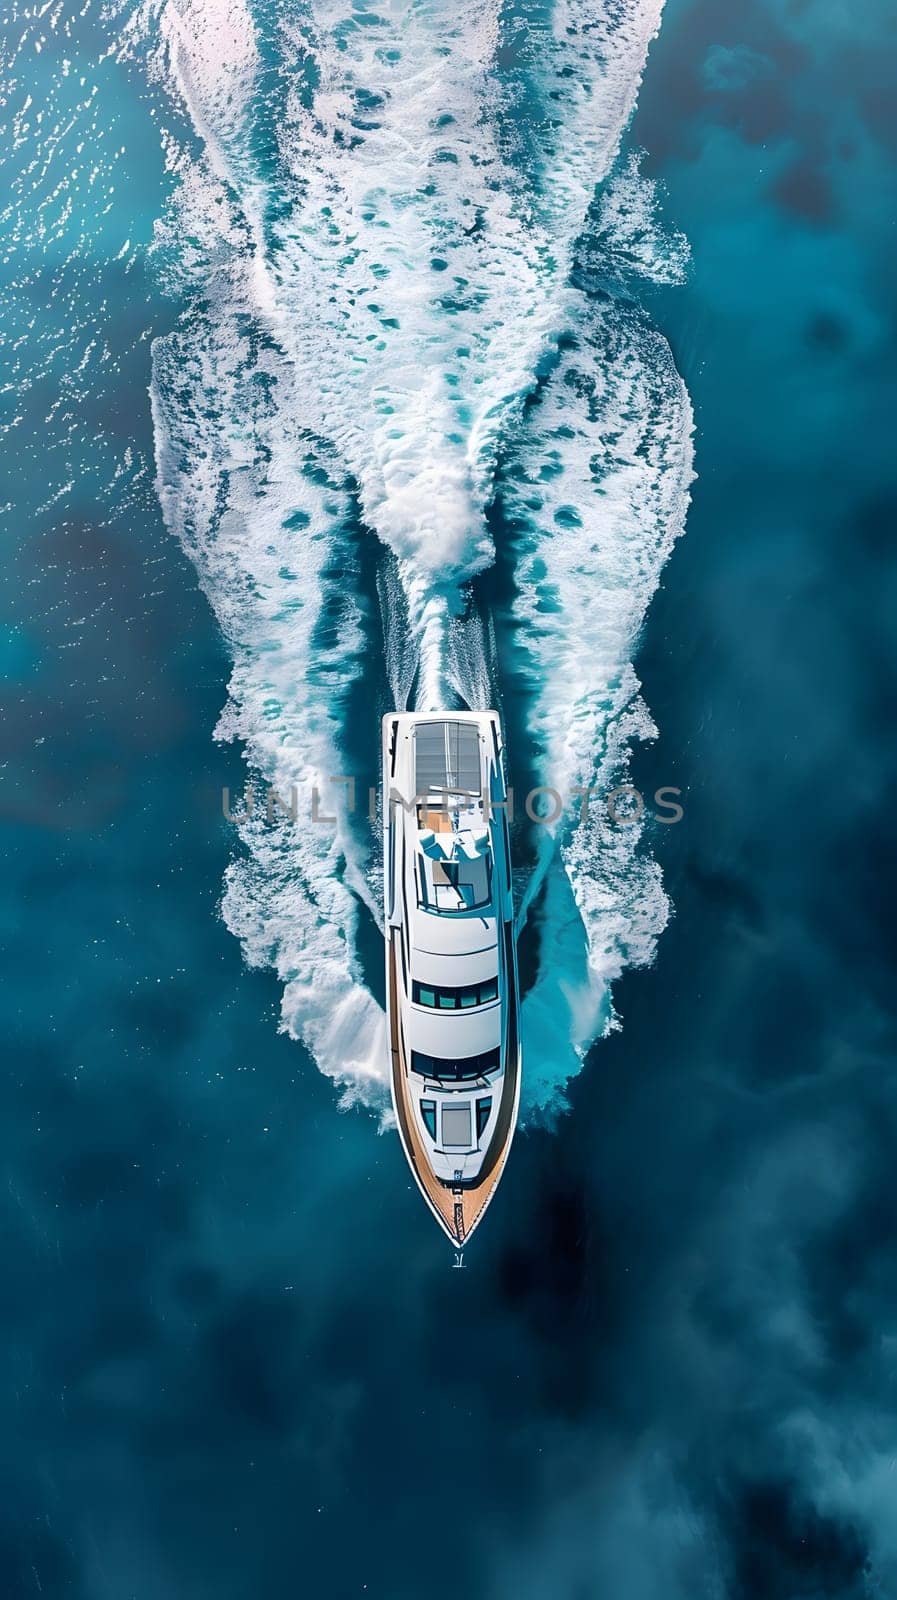 An aerial perspective of a watercraft sailing on liquid surface by Nadtochiy